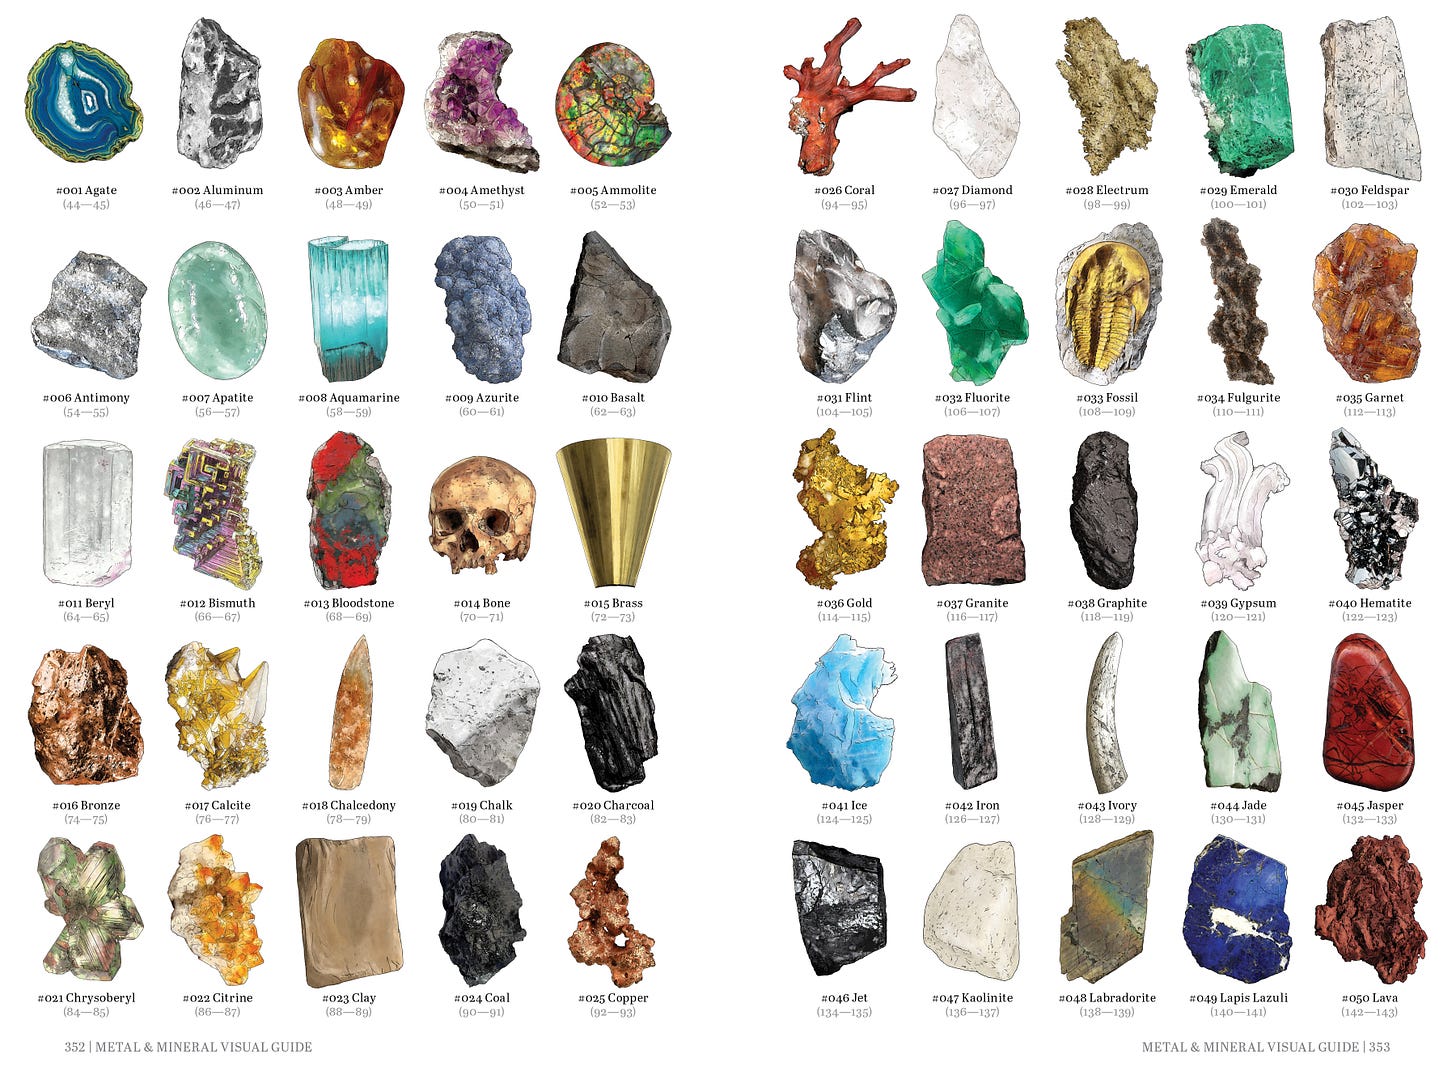 A double-page spread from Geologist's Primer, showing 50 miniature pictures of various metals and minerals.